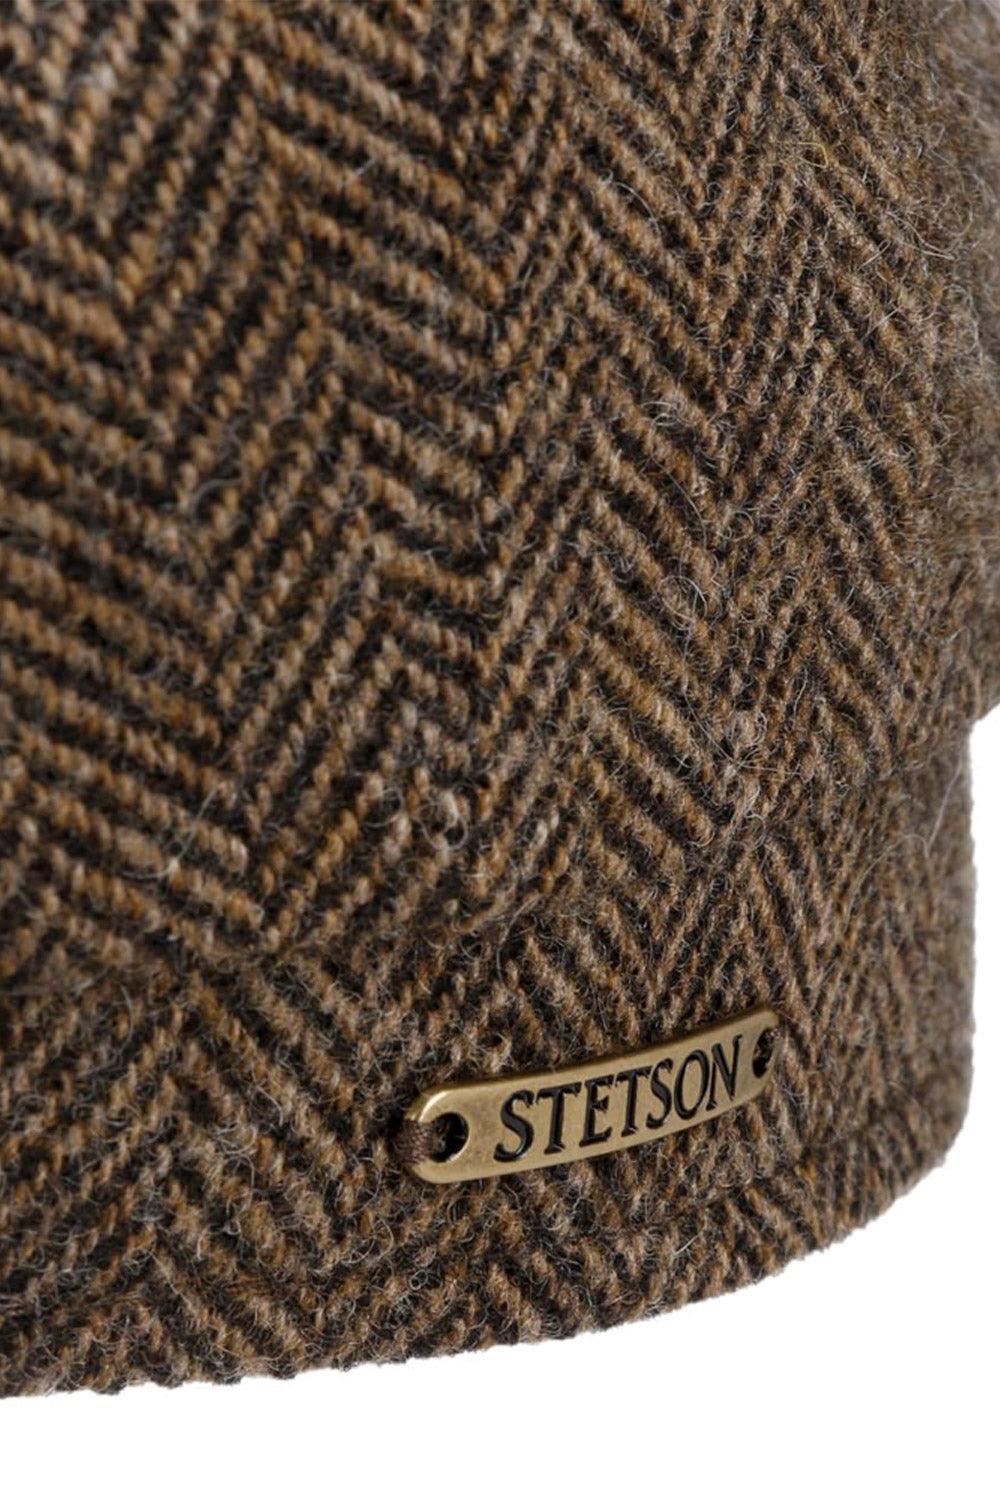 Buy the Stetson Hatteras Classic Wool Flat Cap in Brown/Black at Intro. Spend £50 for free UK delivery. Official stockists. We ship worldwide.